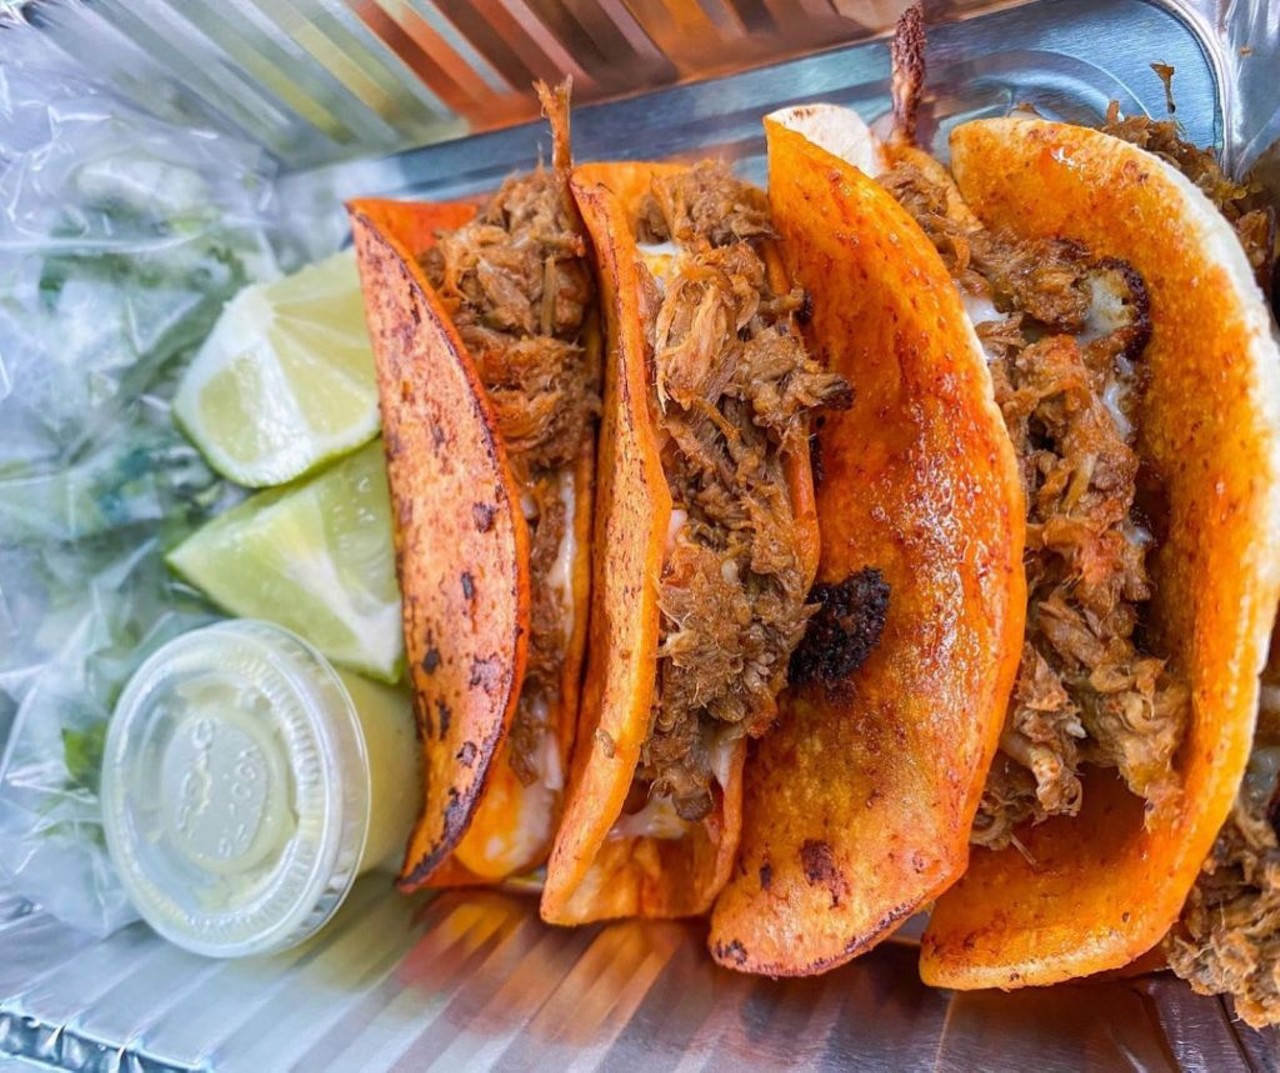 Antojitos Locos 
16131 W. Colonial Drive, Oakland
The family-owned Antojitos Locos has cultivated a large fan base. Self-titled as the &#147;best birria in Florida&#148;, it&#146;s no wonder why there&#146;s always a line outside their food truck. 
Photo via Antojitos Locos/Facebook